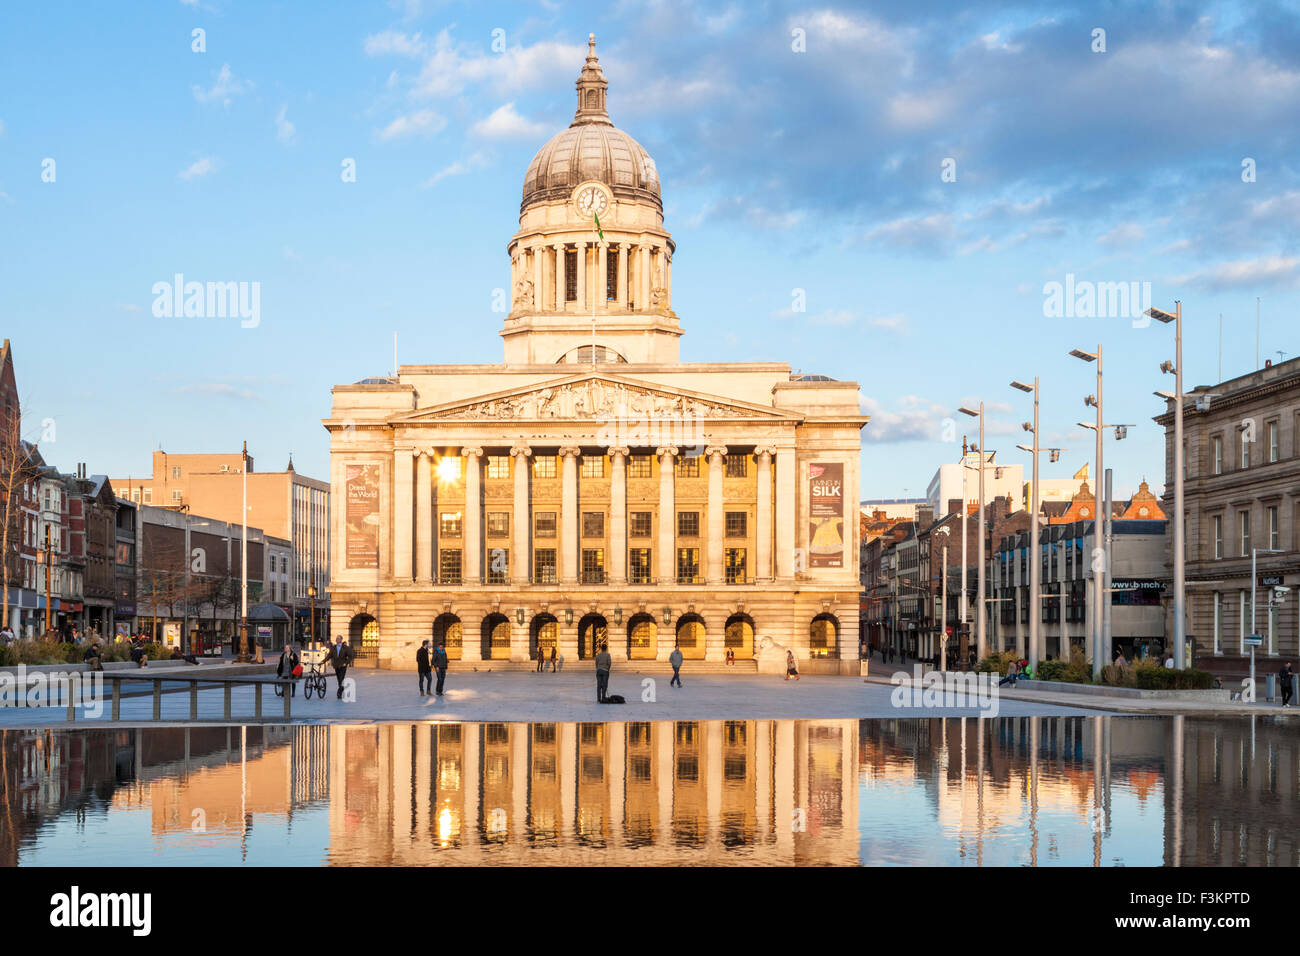 Evening sunlight shining on the Council House in The Old Market Square in Nottingham city centre, England, UK Stock Photo